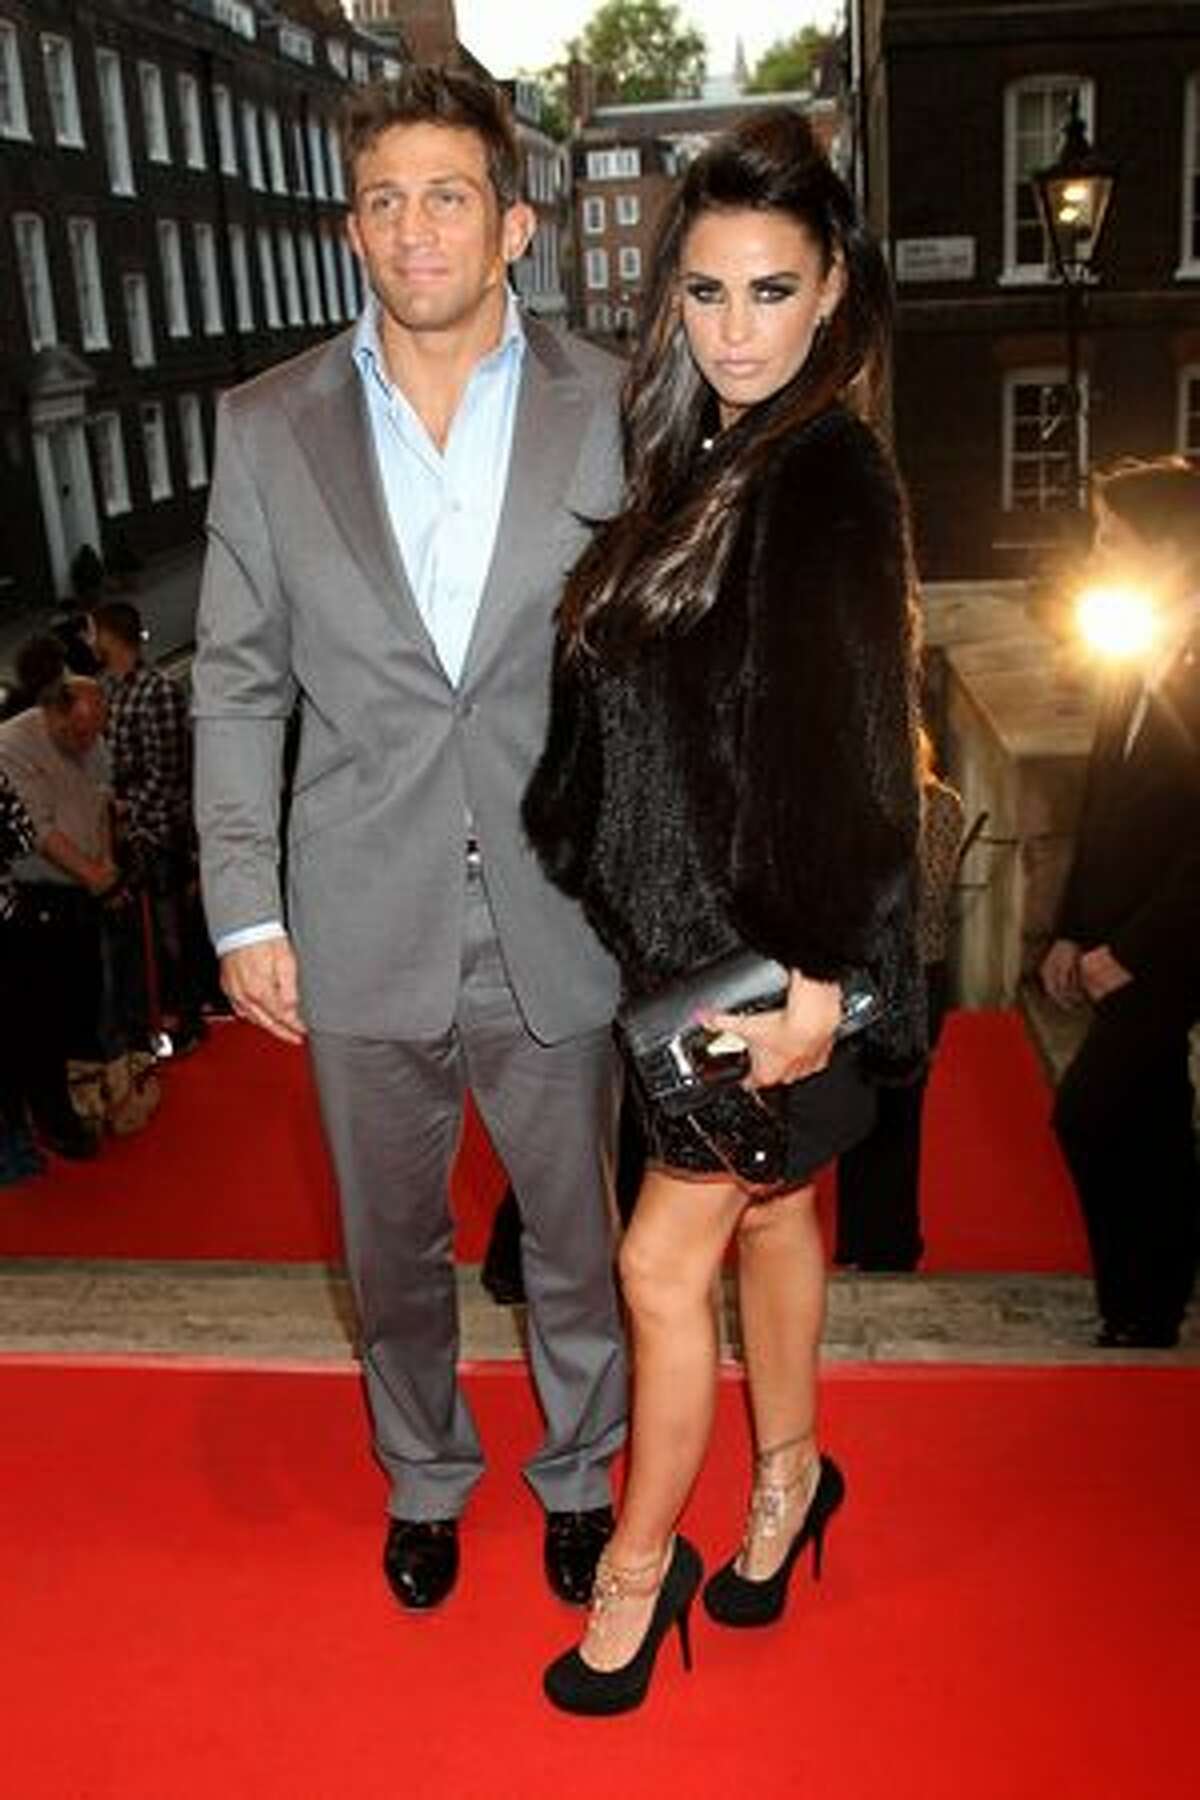 Alex Reid and Katie Price arrive at the Keep A Child Alive Black Ball held at St John's, Smith Square on Thursday, May 27 in London, England.